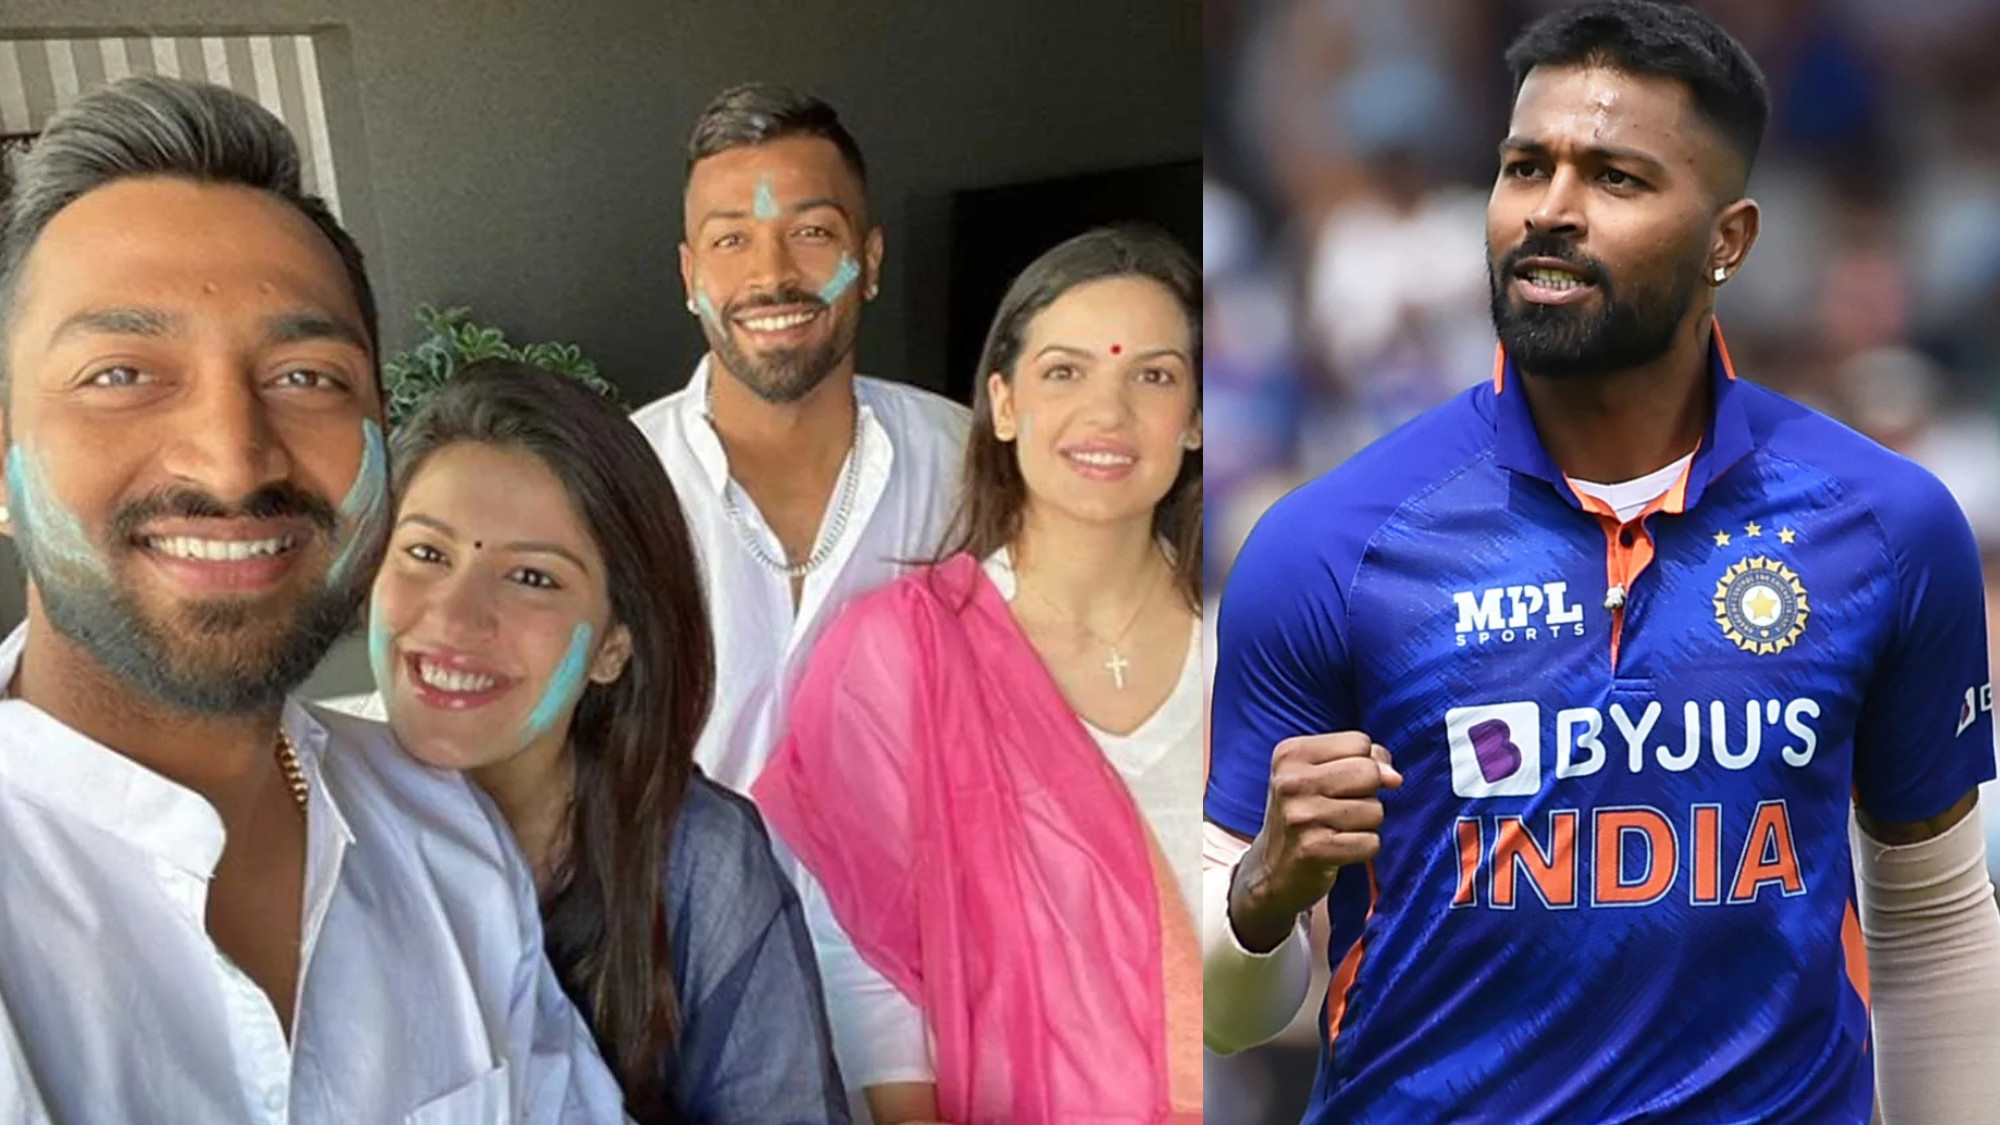 Hardik Pandya credits his family for allowing him to focus on himself as he worked on getting fitter